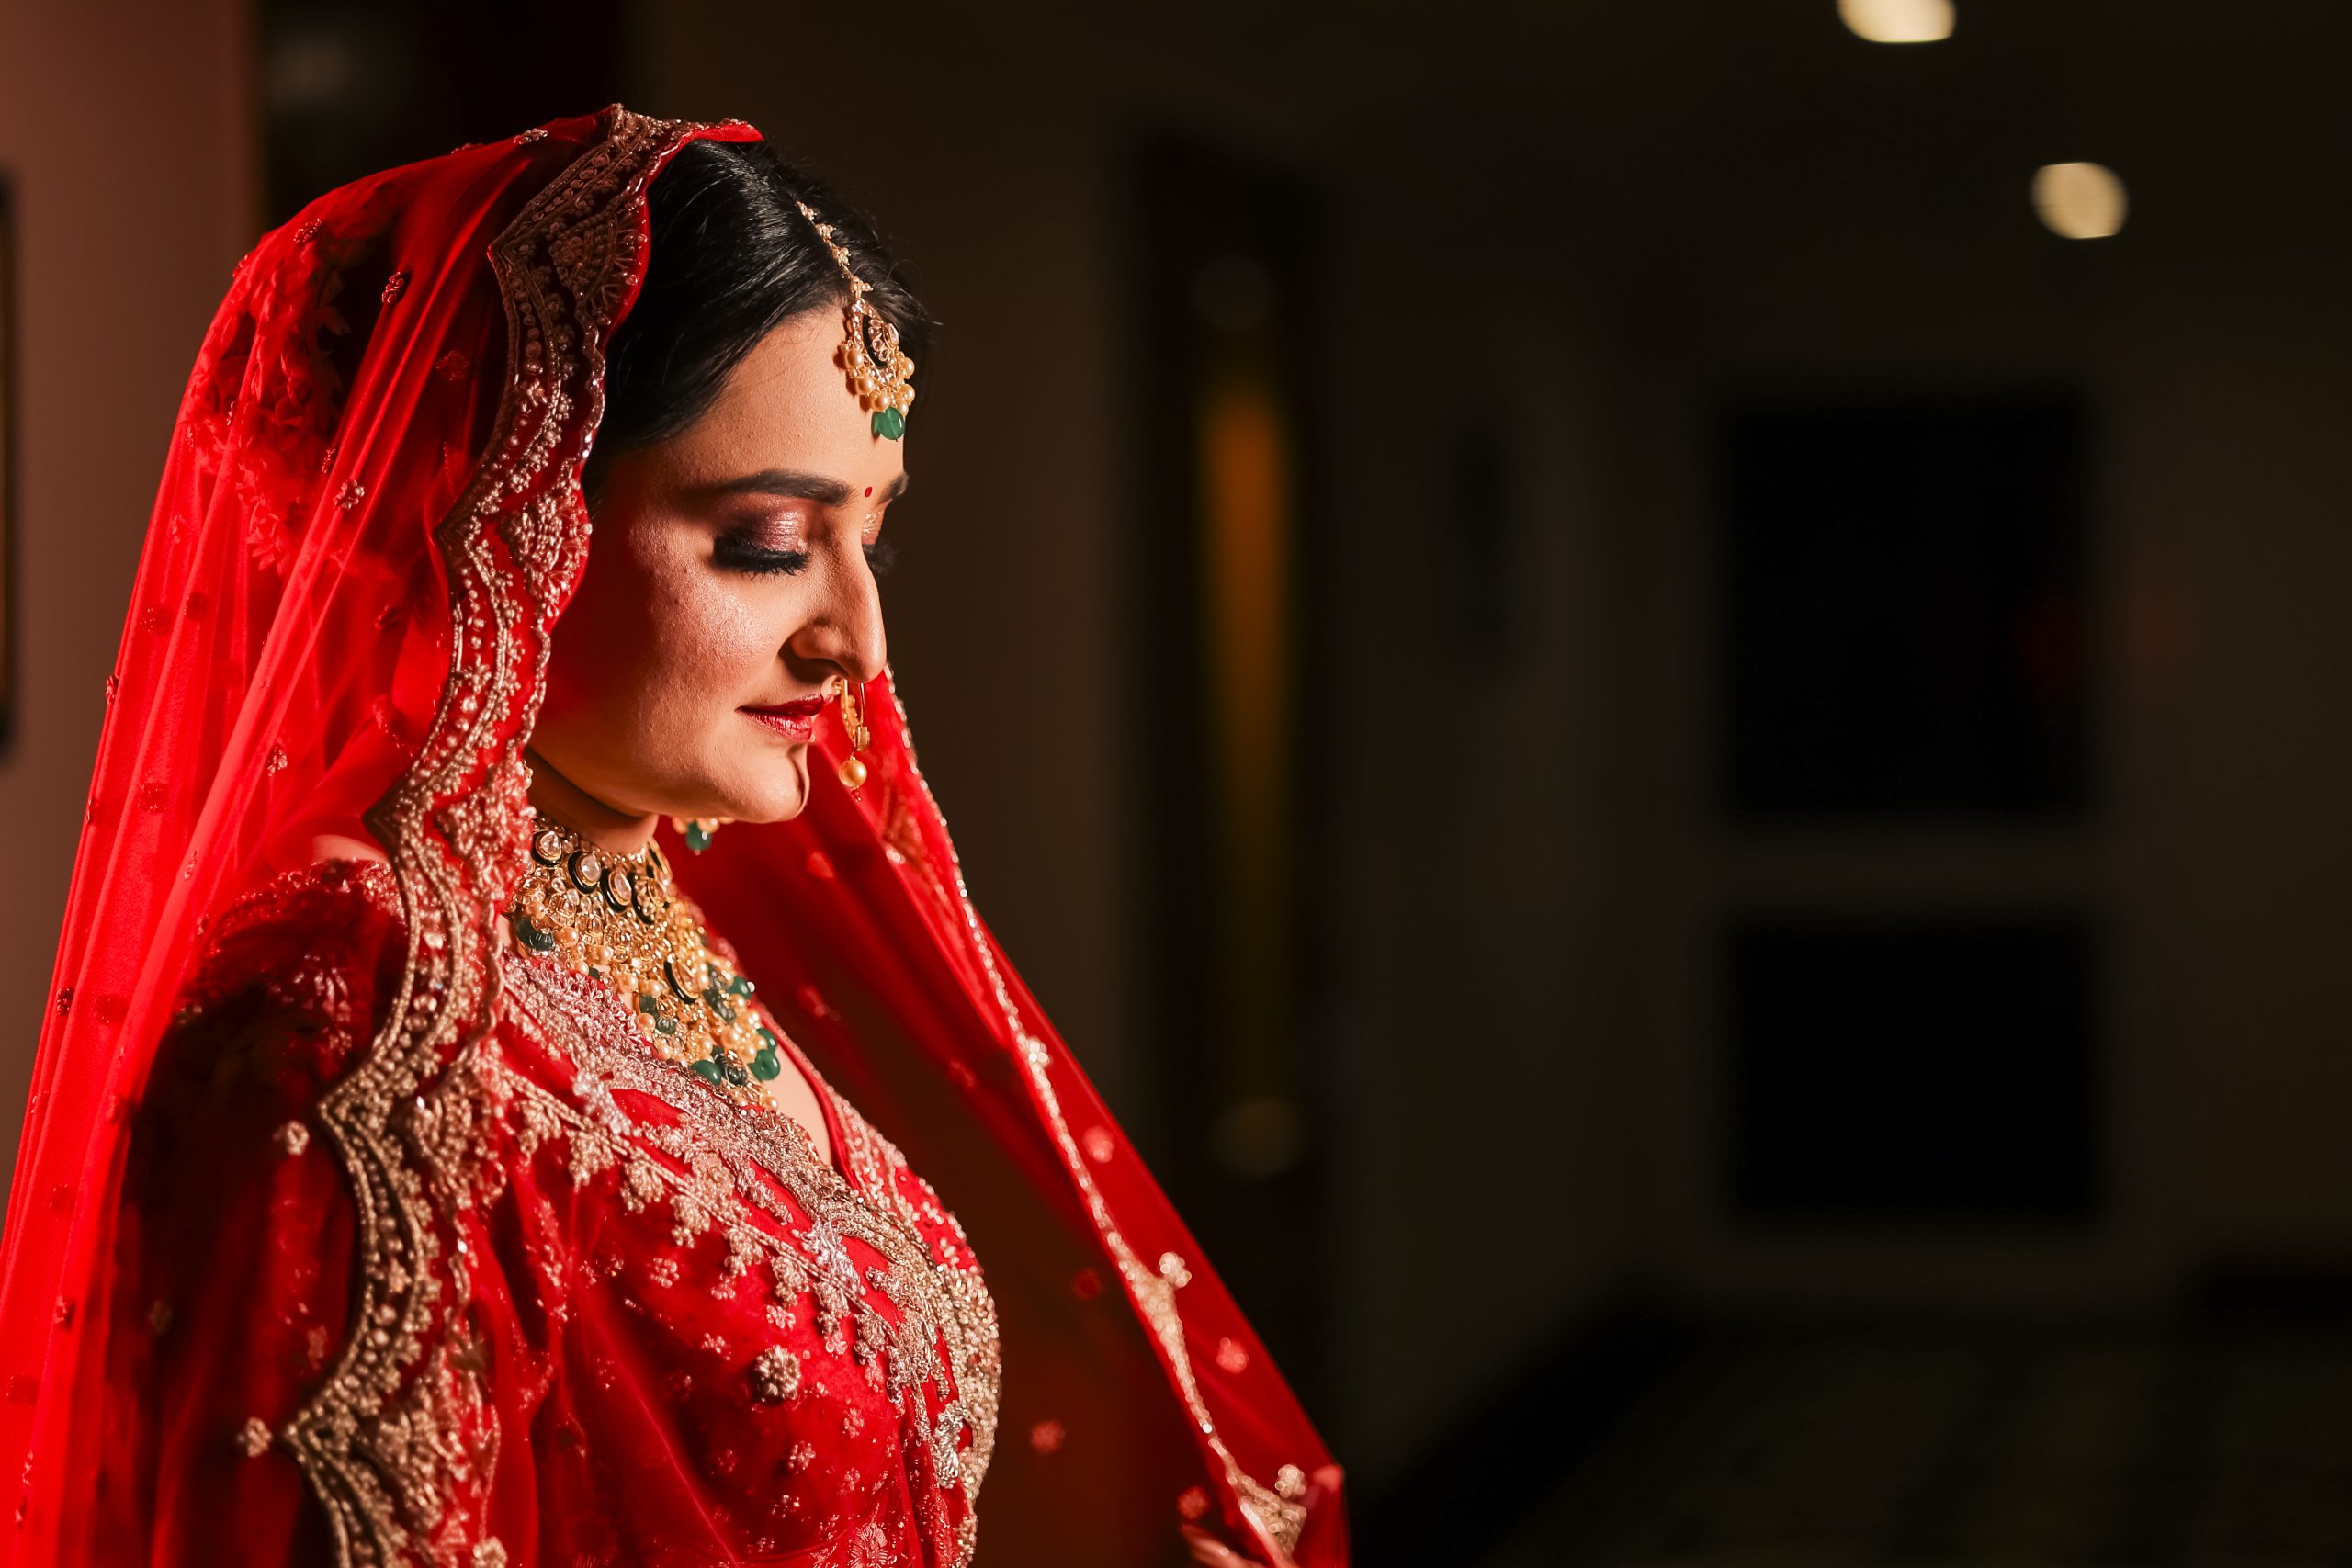 How To Take Best Wedding Photography: A Guide to Perfect Wedding Photography